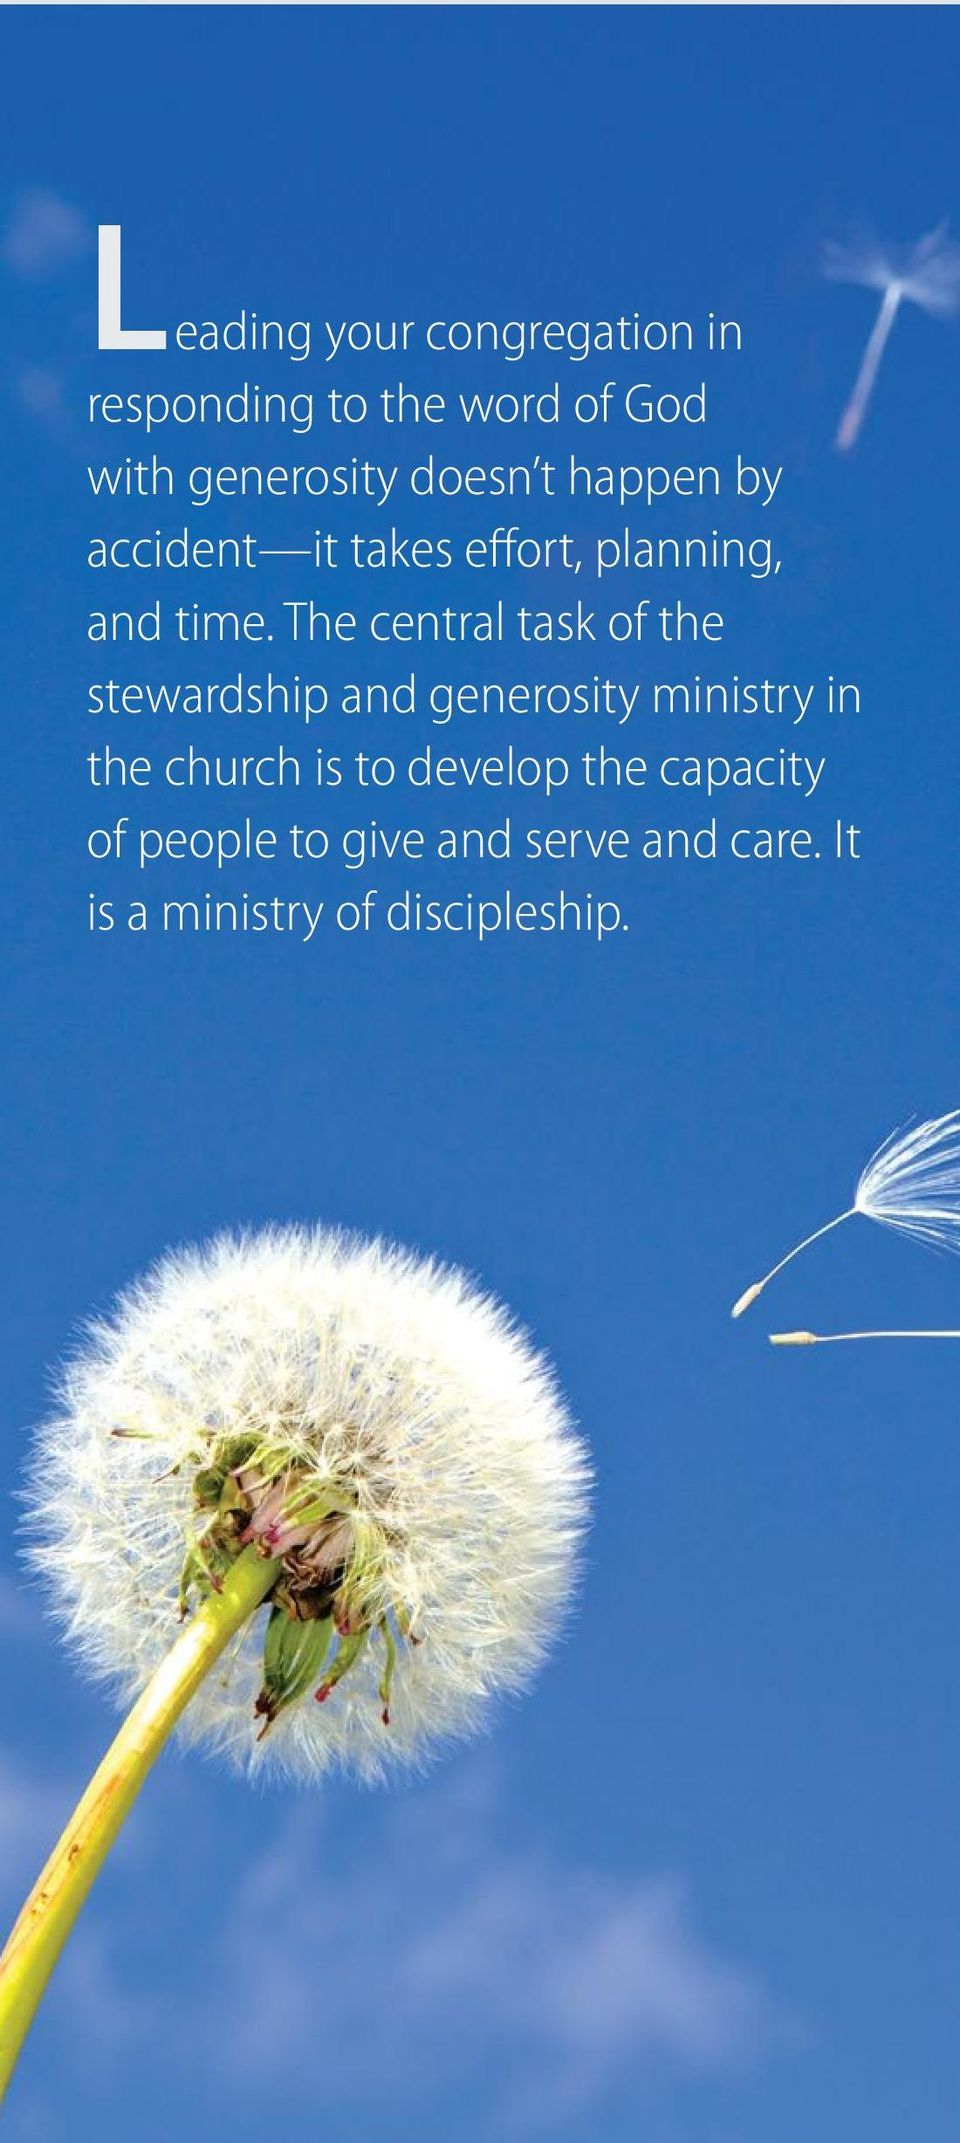 The central task of the stewardship and generosity ministry in the church is